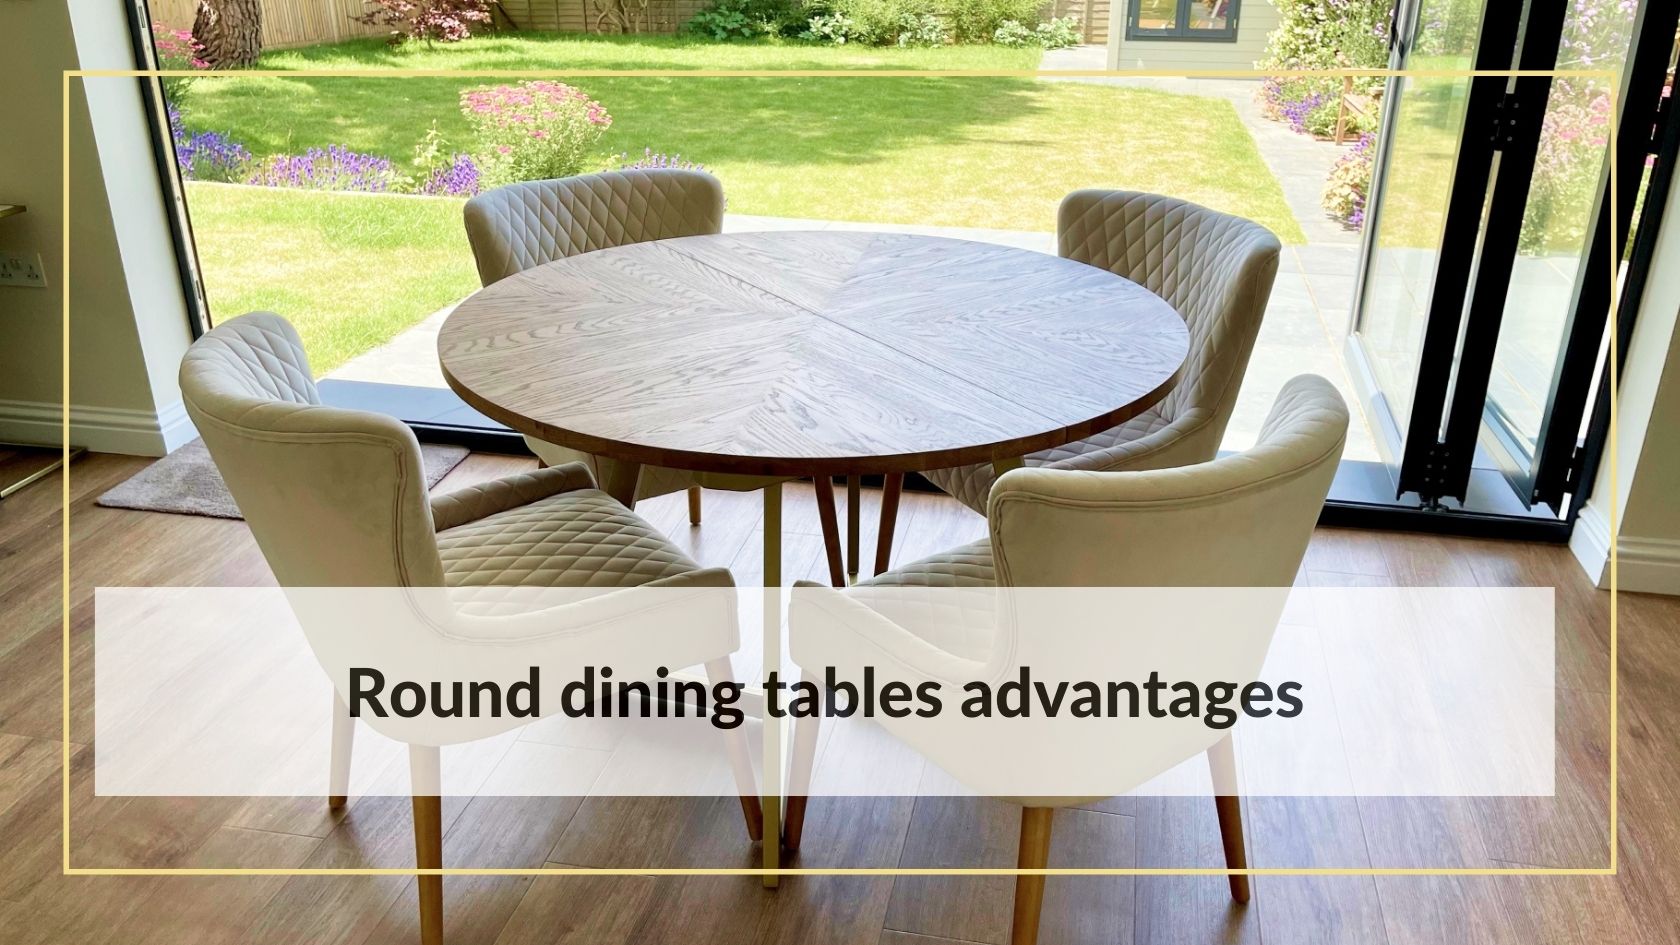 Round dining table adnvantages - banner